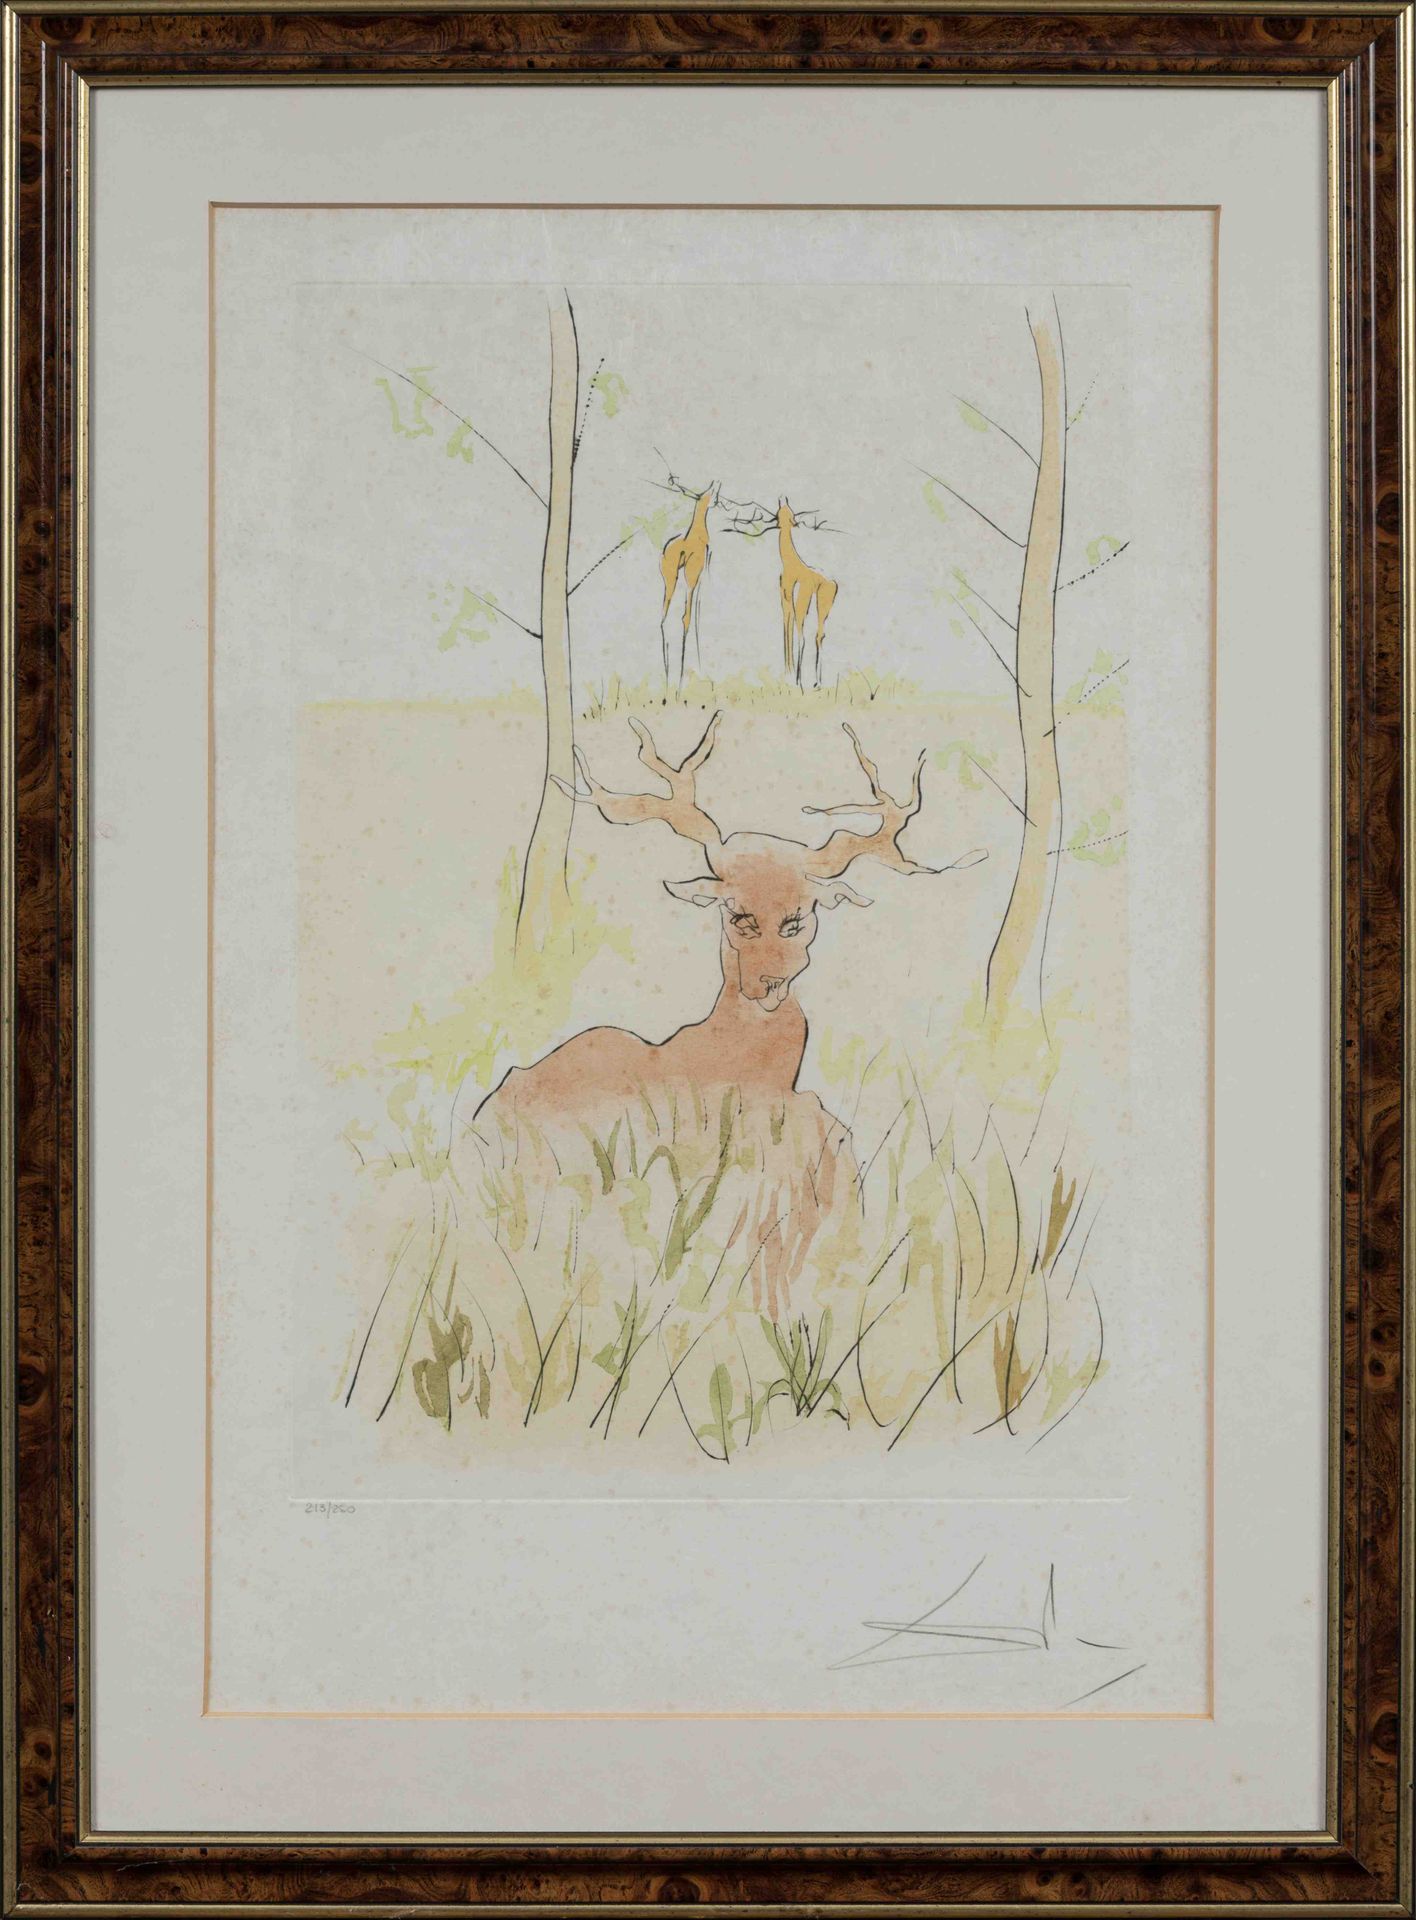 Null Salvador DALI (1904-1989)

"The sick deer" (1974).

Engraving on Japan from&hellip;